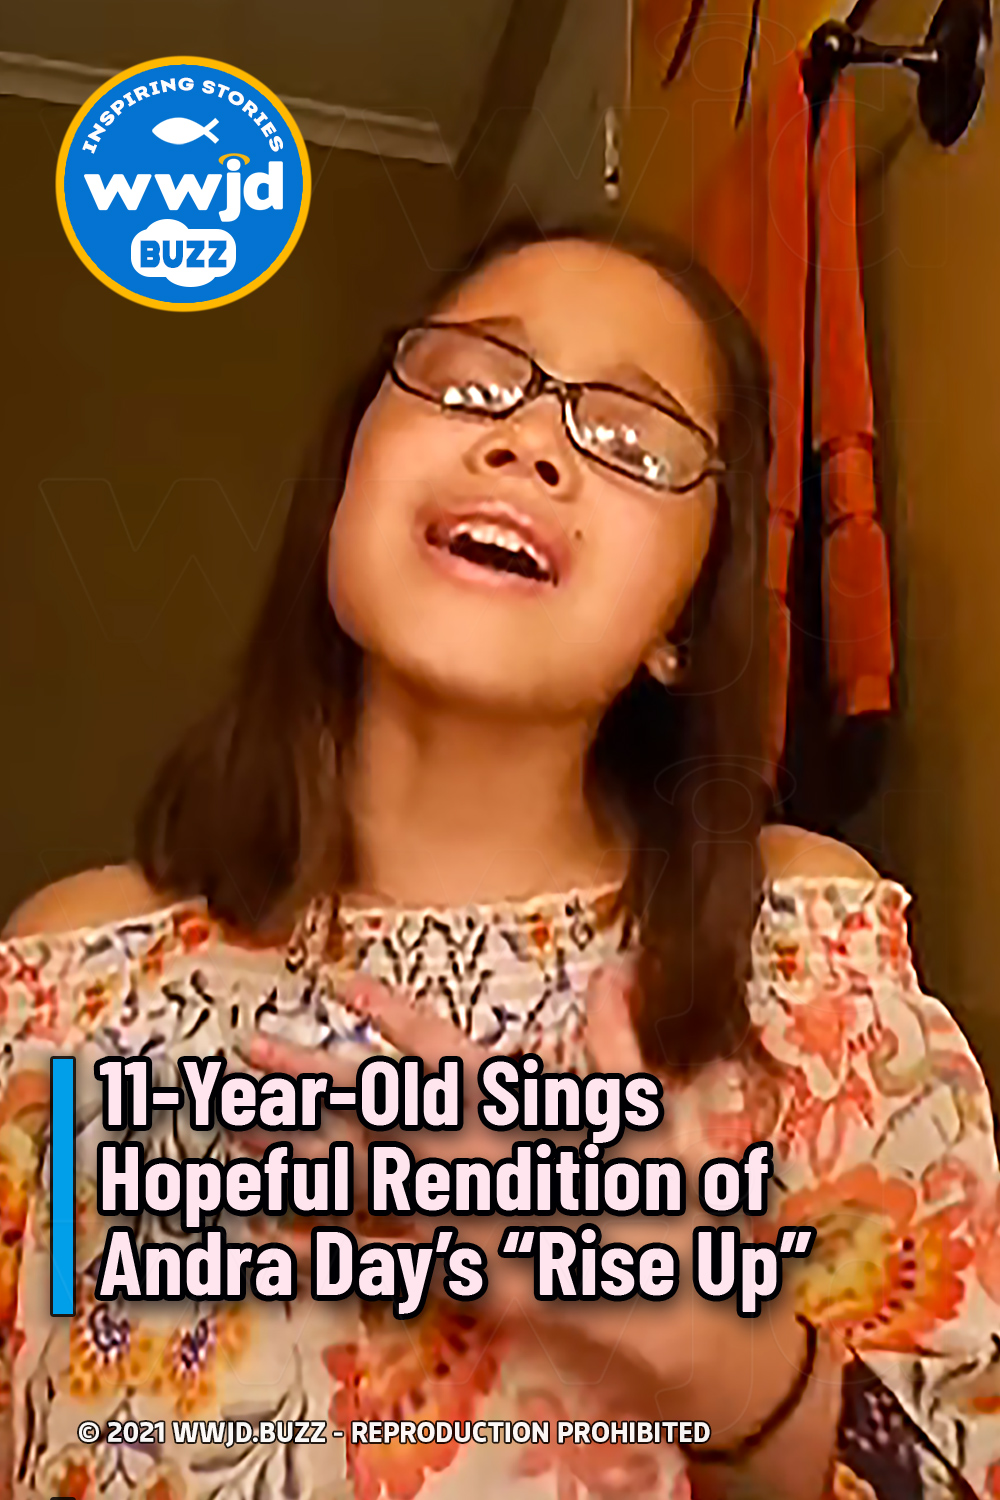 11-Year-Old Sings Hopeful Rendition of Andra Day’s “Rise Up”